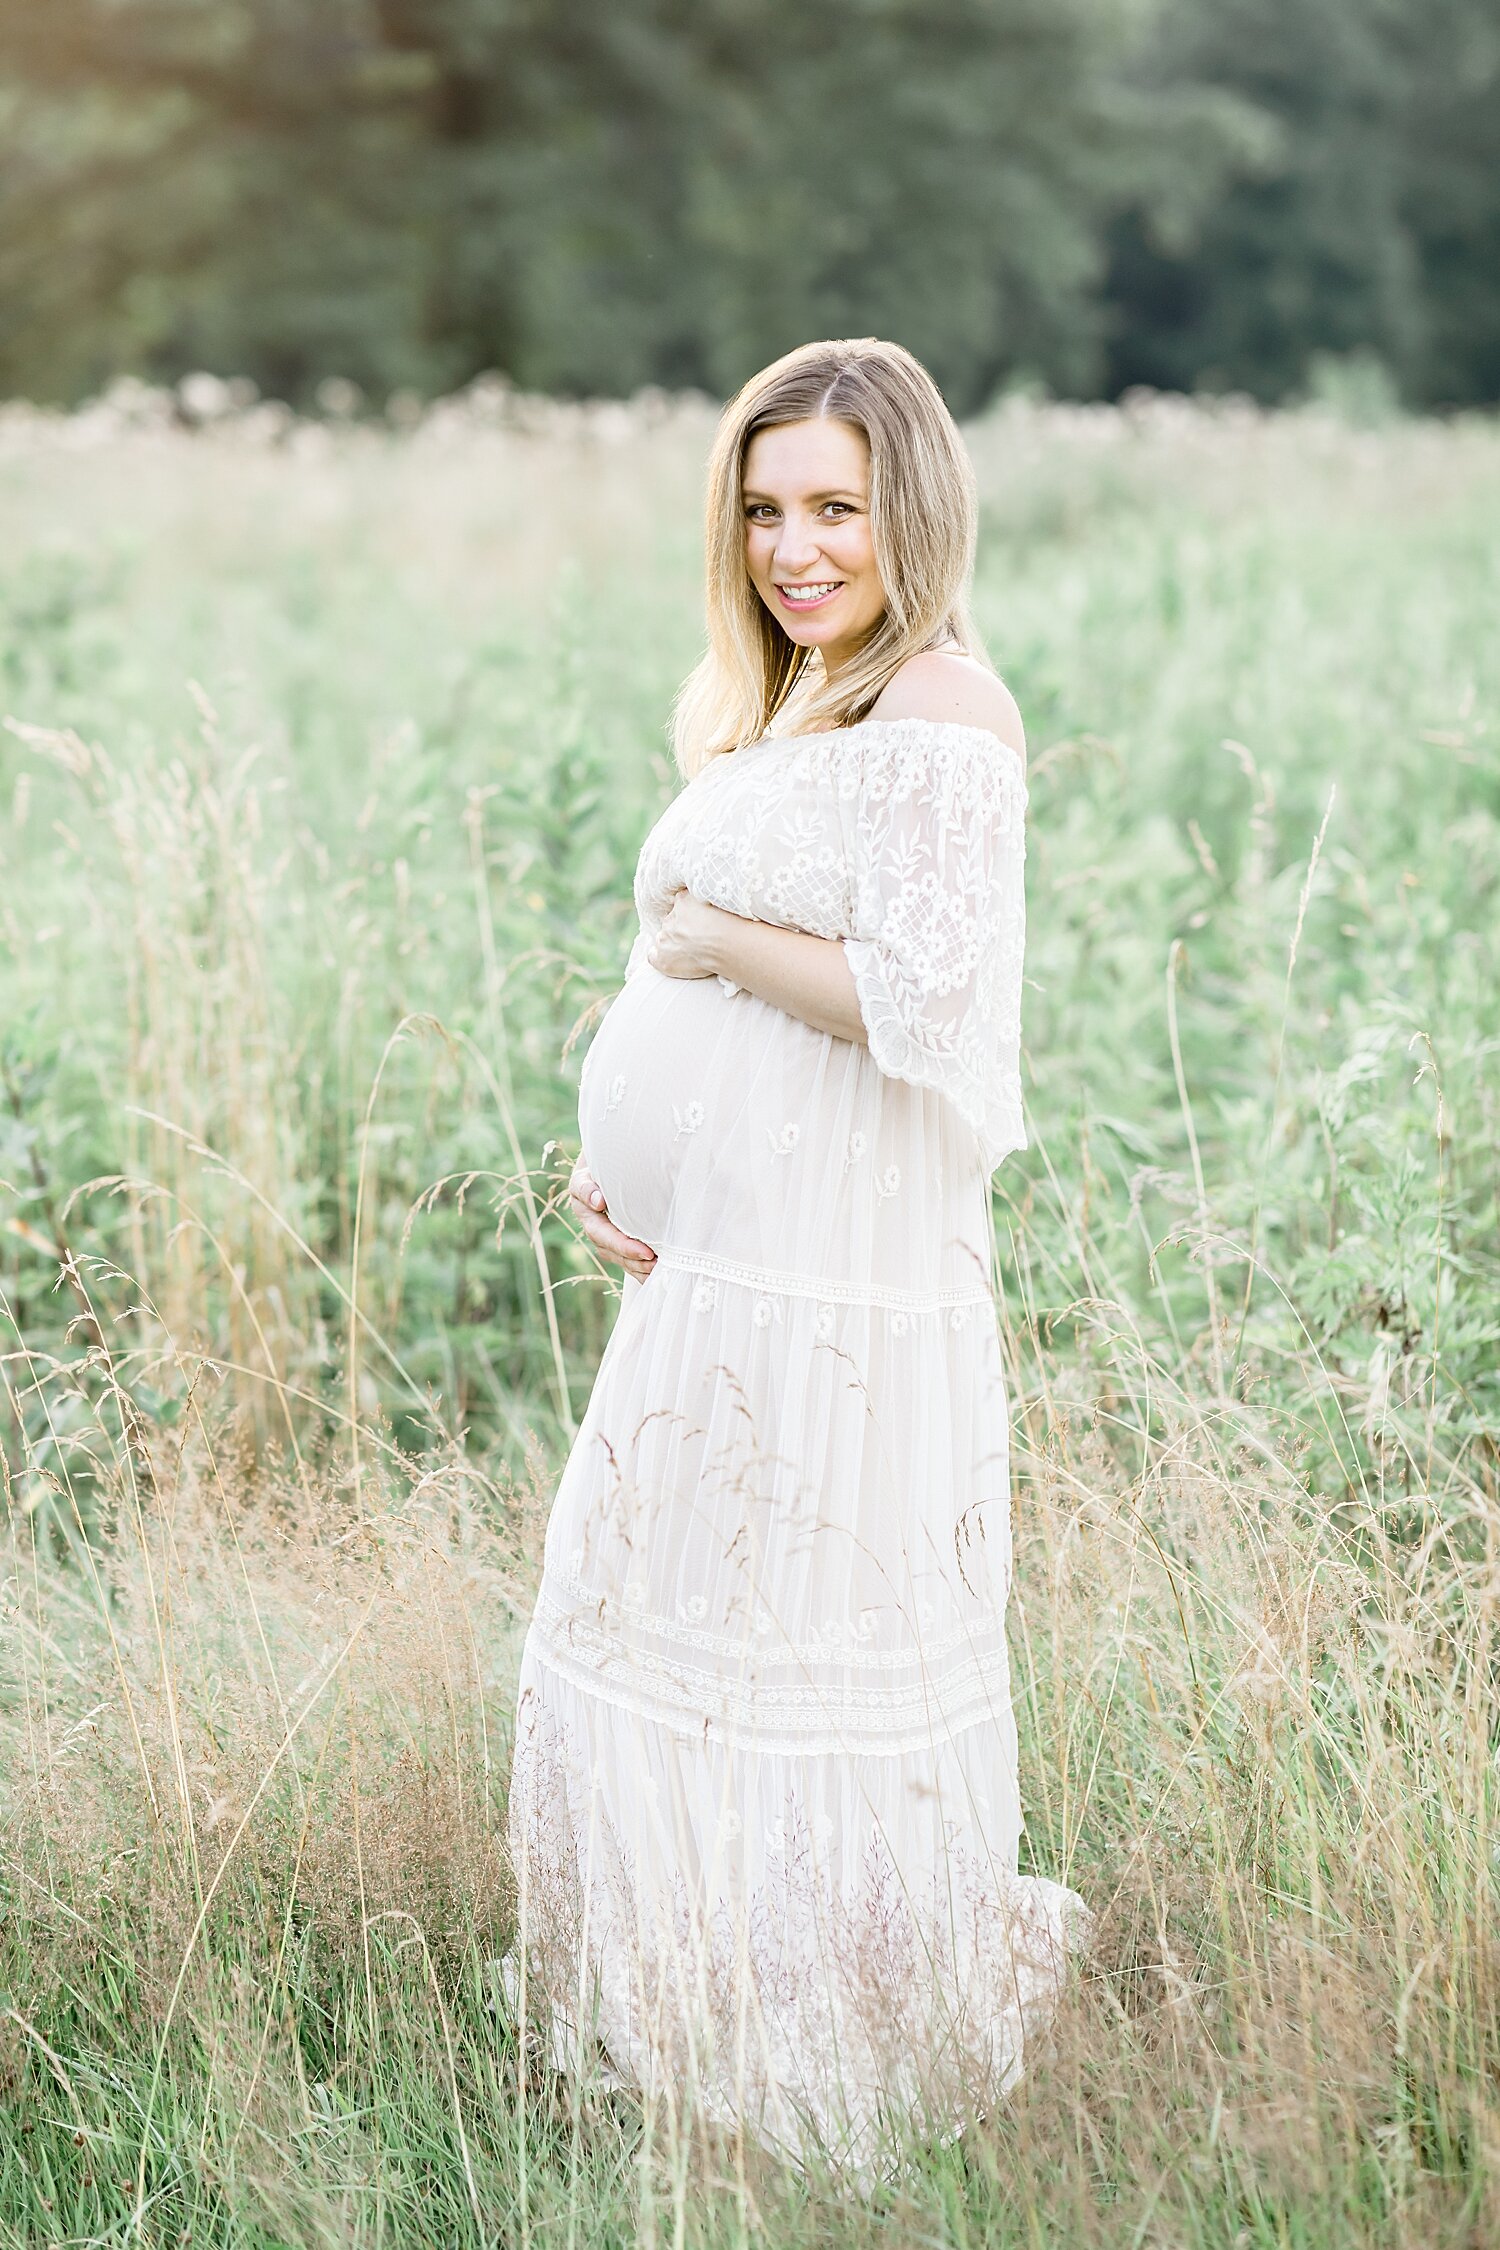 Maternity session with Connecticut Maternity and Newborn Photographer, Kristin Wood Photography.